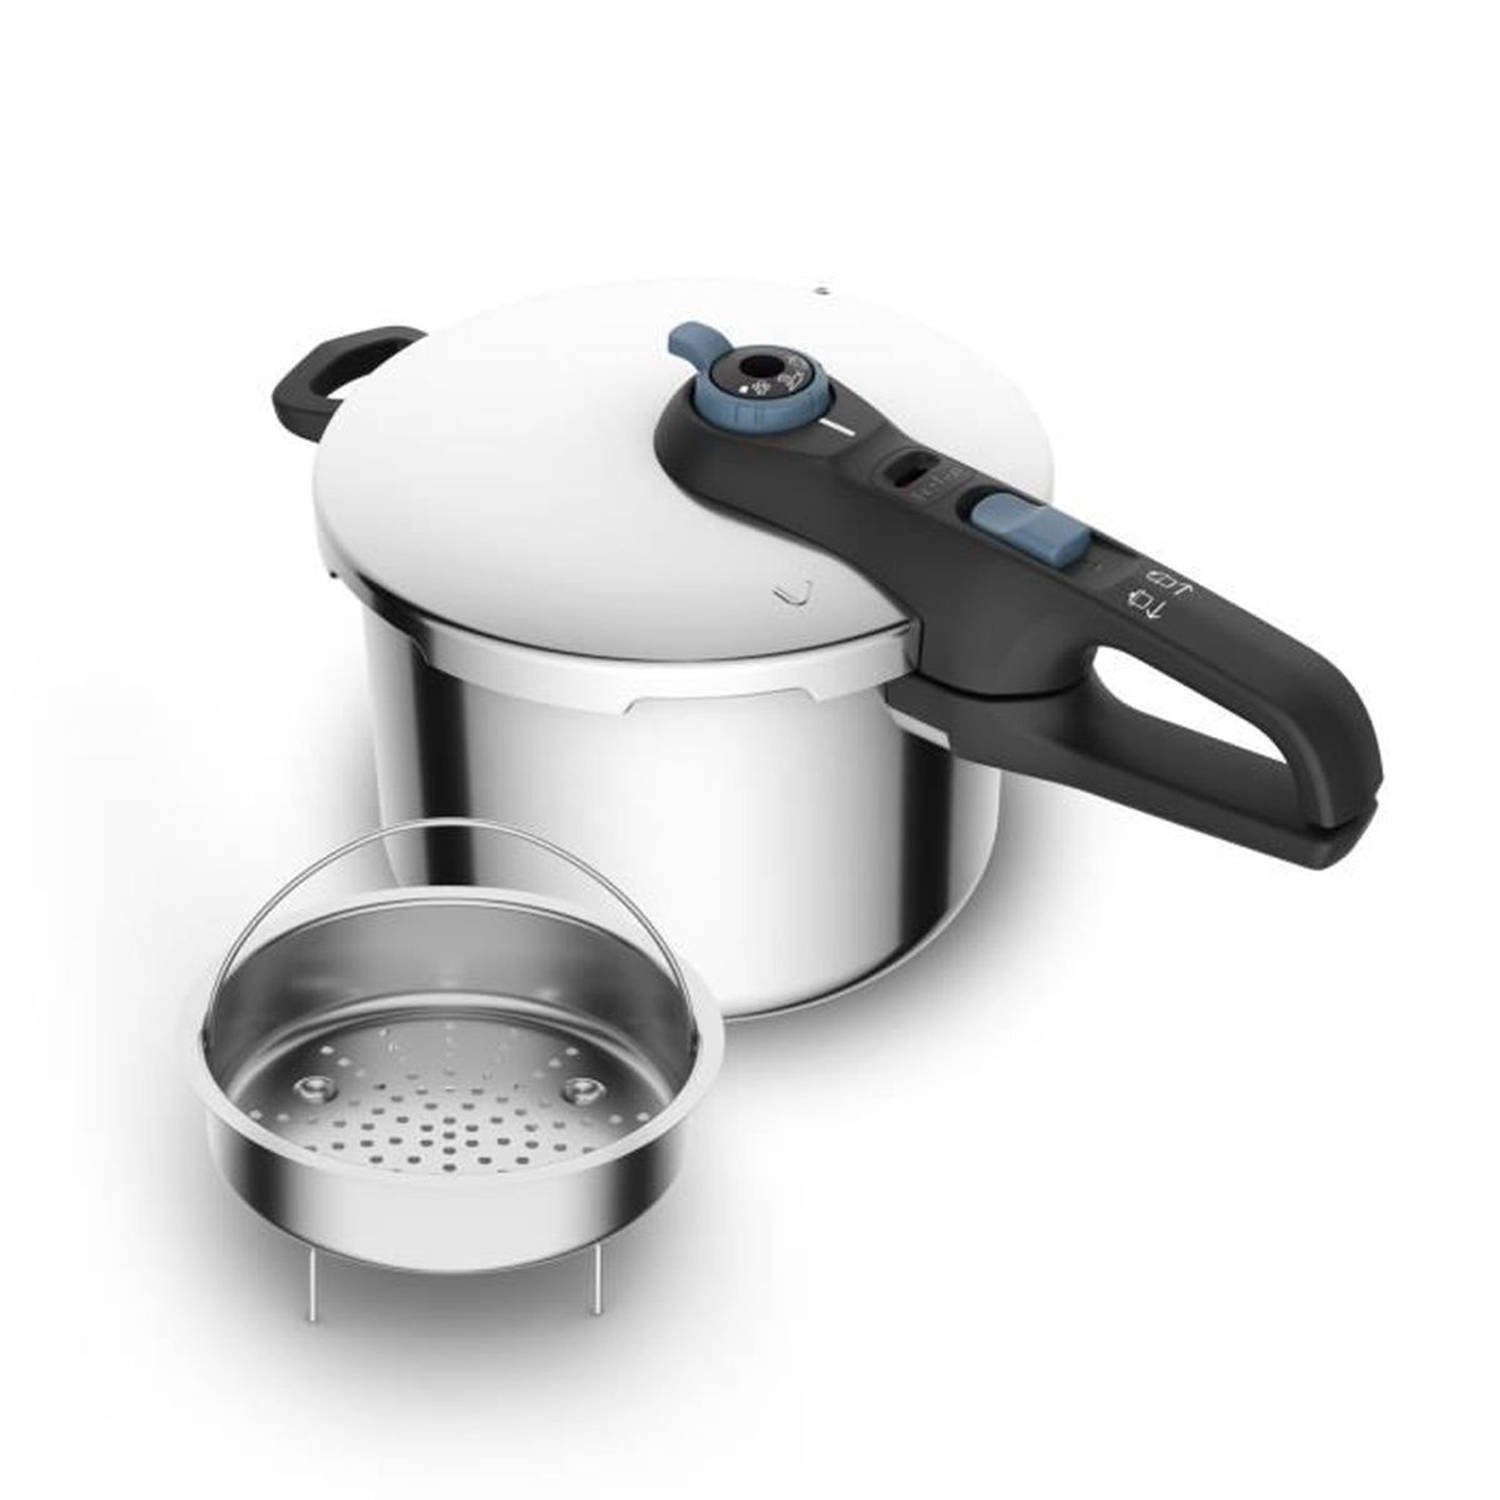 Tefal Snelkookpan 6 l, Inductie, Roestvrijstaal, 2 programma&apos;s, Stoomkoken, Made in France, Secure Trendy P2580700